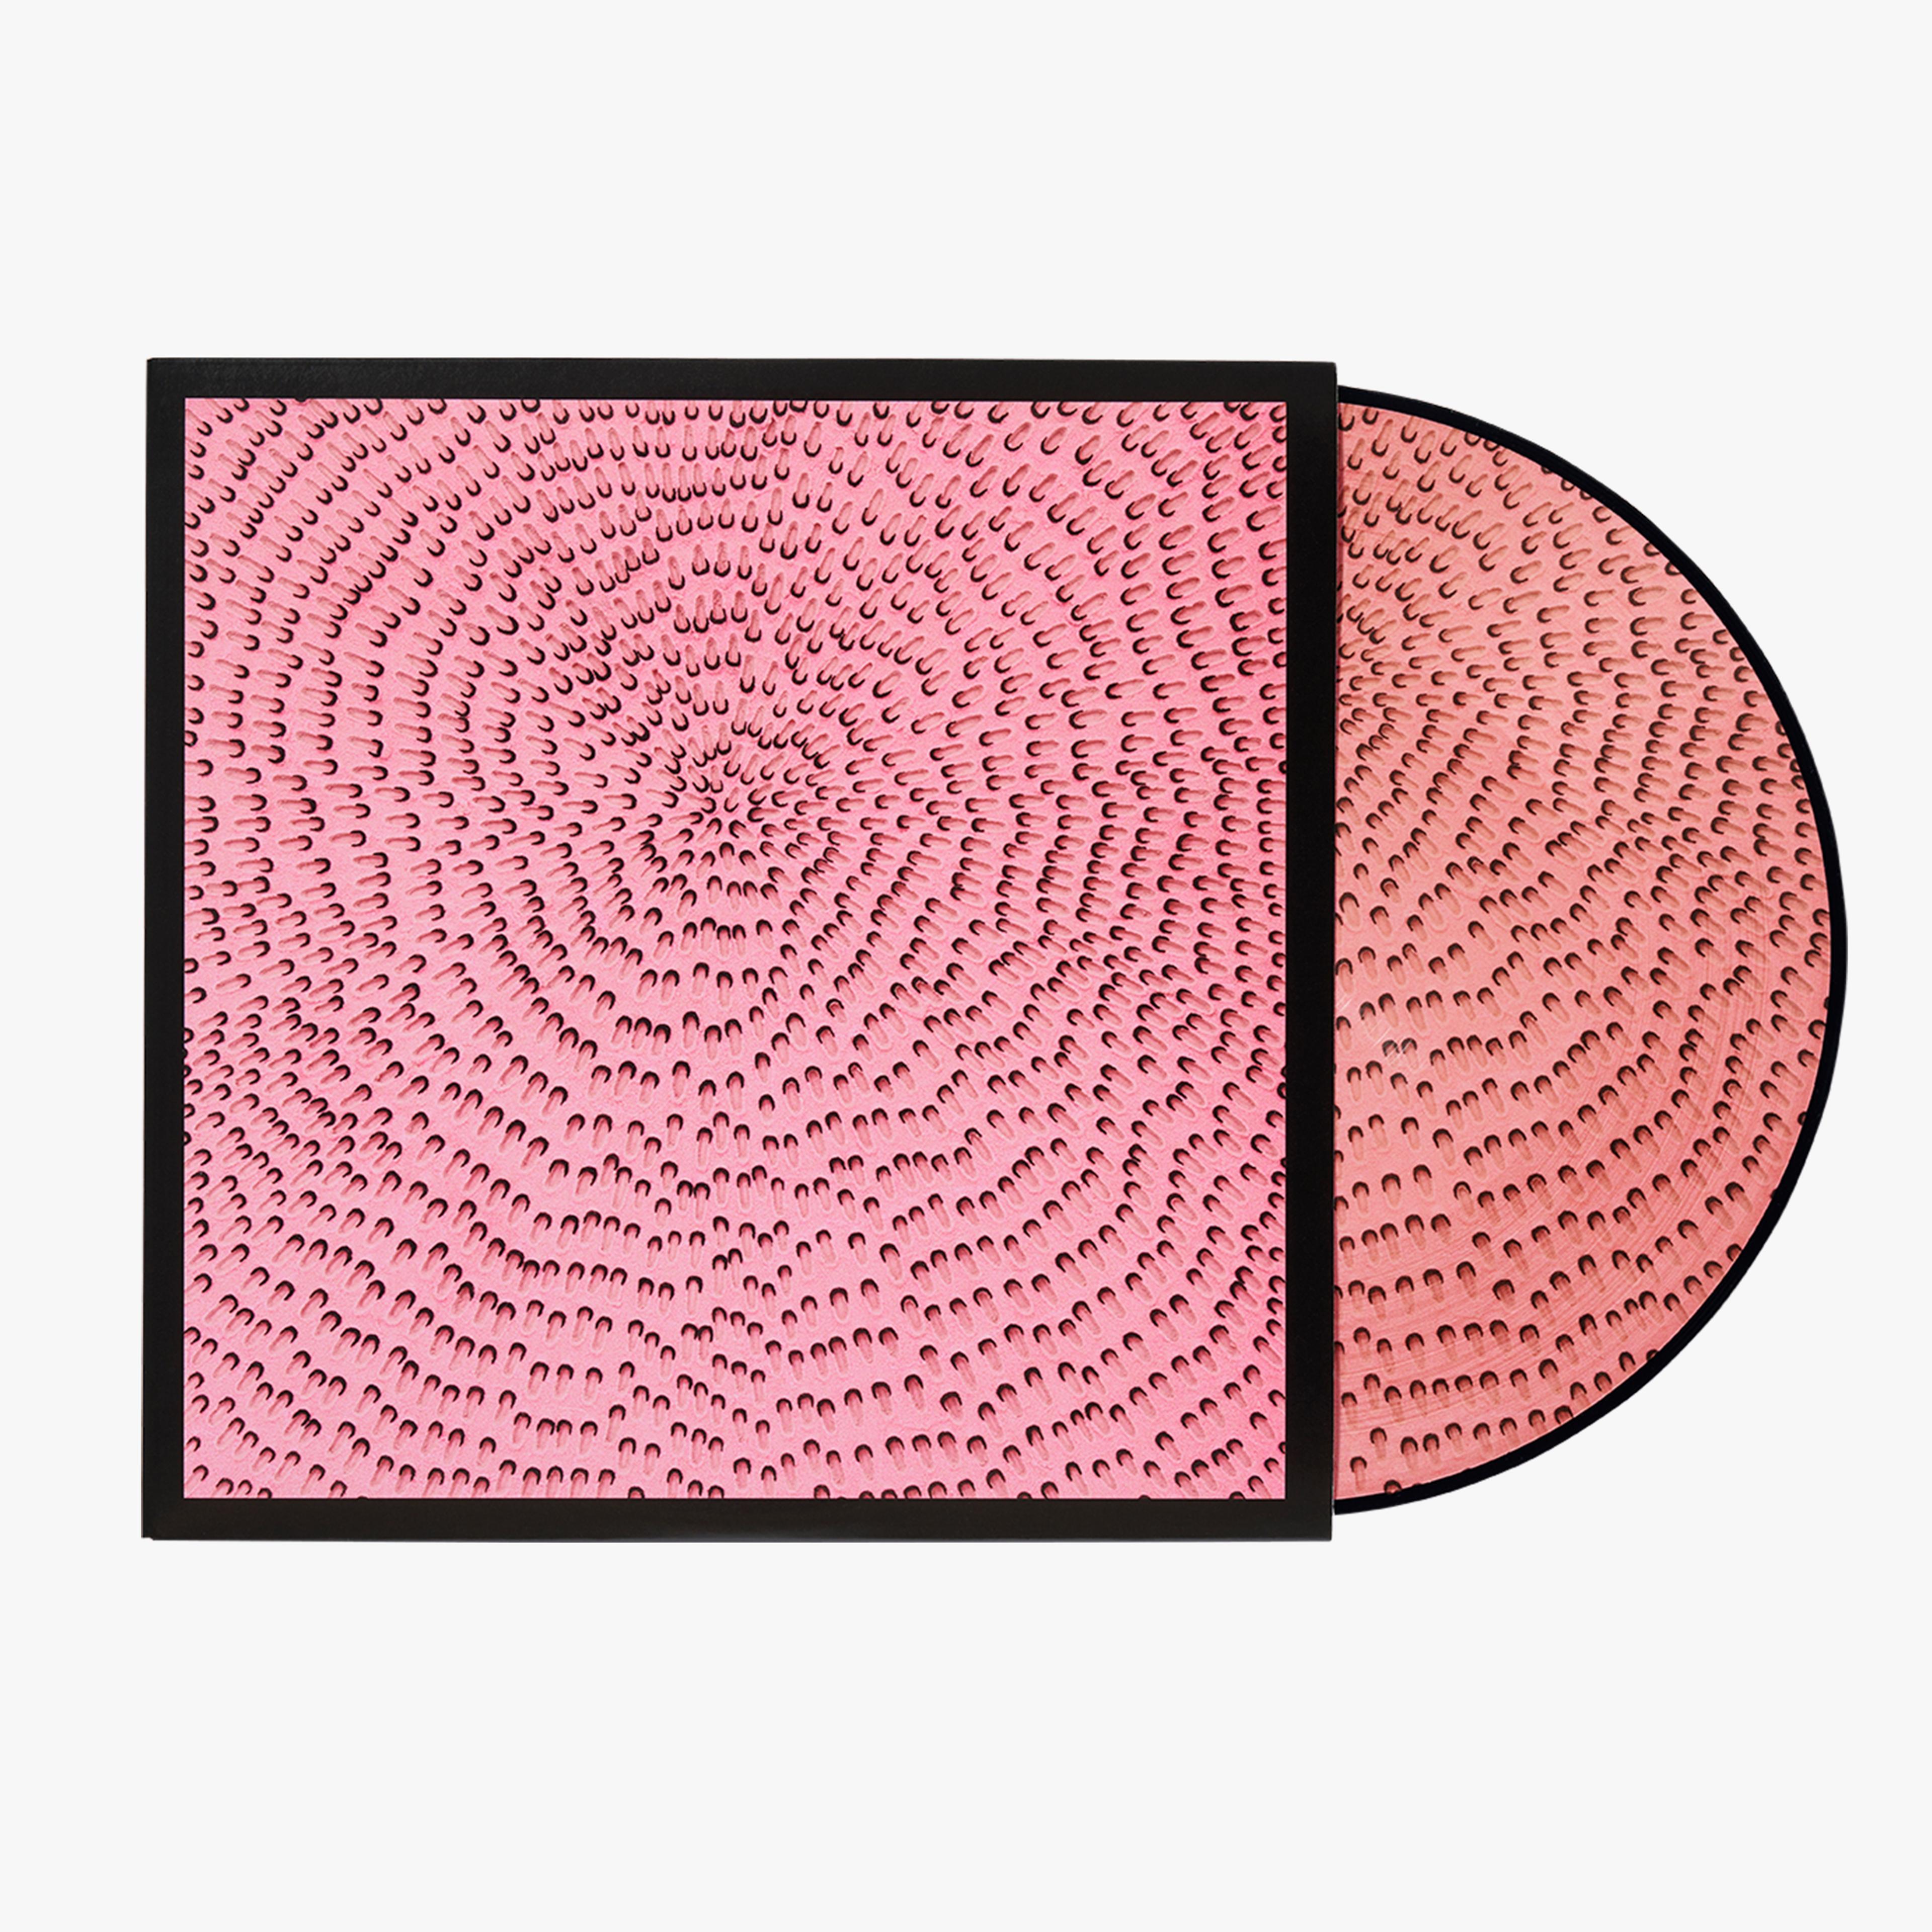 BLACKPINK - THE ALBUM by Jennifer Guidi Gallery Picture Disc